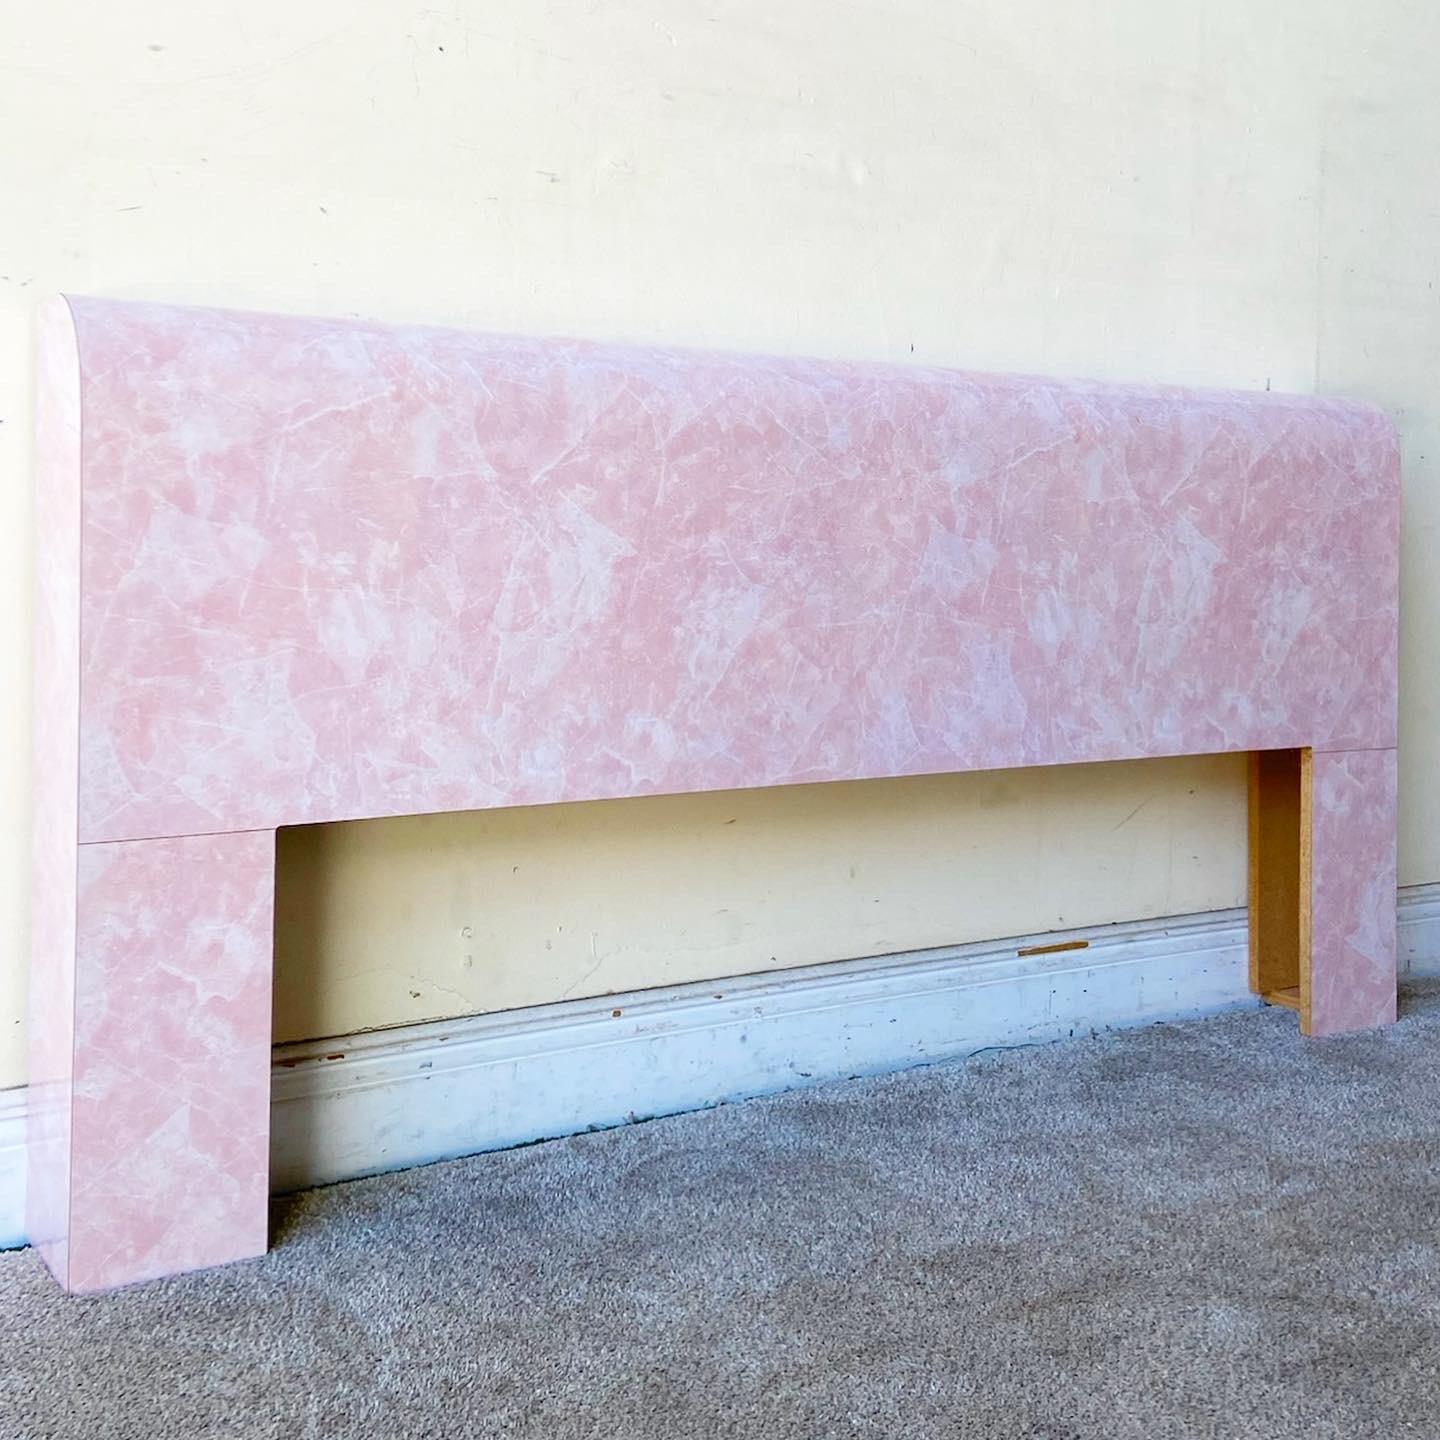 Exceptional postmodern queen size waterfall headboard. Features a pink faux marble glossy laminate.
 